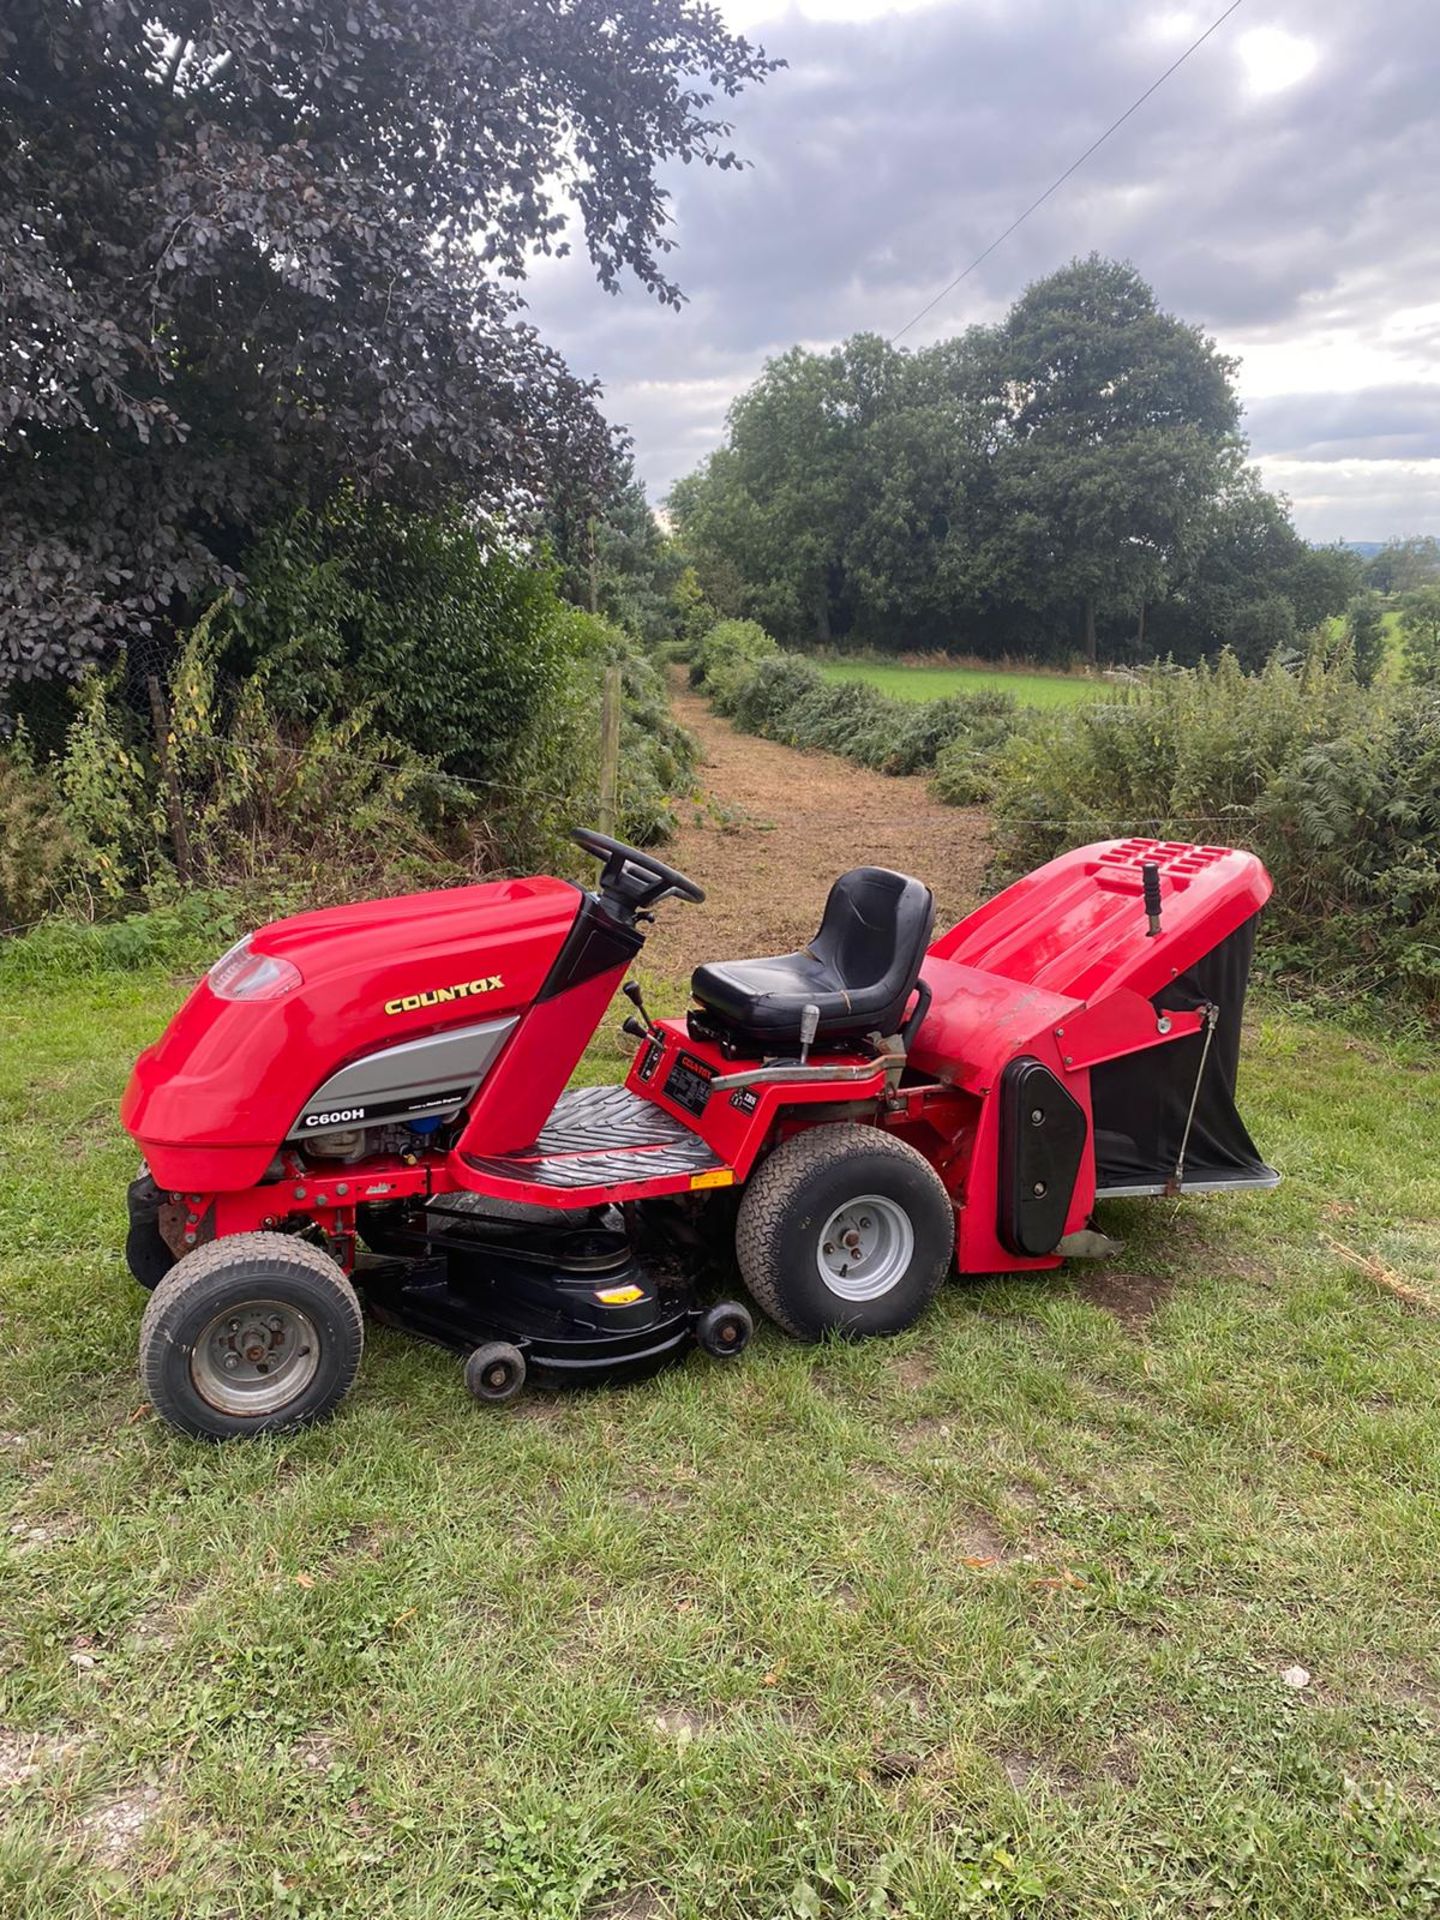 COUNTAX C600H 4 WHEEL DRIVE RIDE ON LAWN MOWER, RUNS DRIVES CUTS AND COLLECTS *NO VAT* - Image 9 of 11